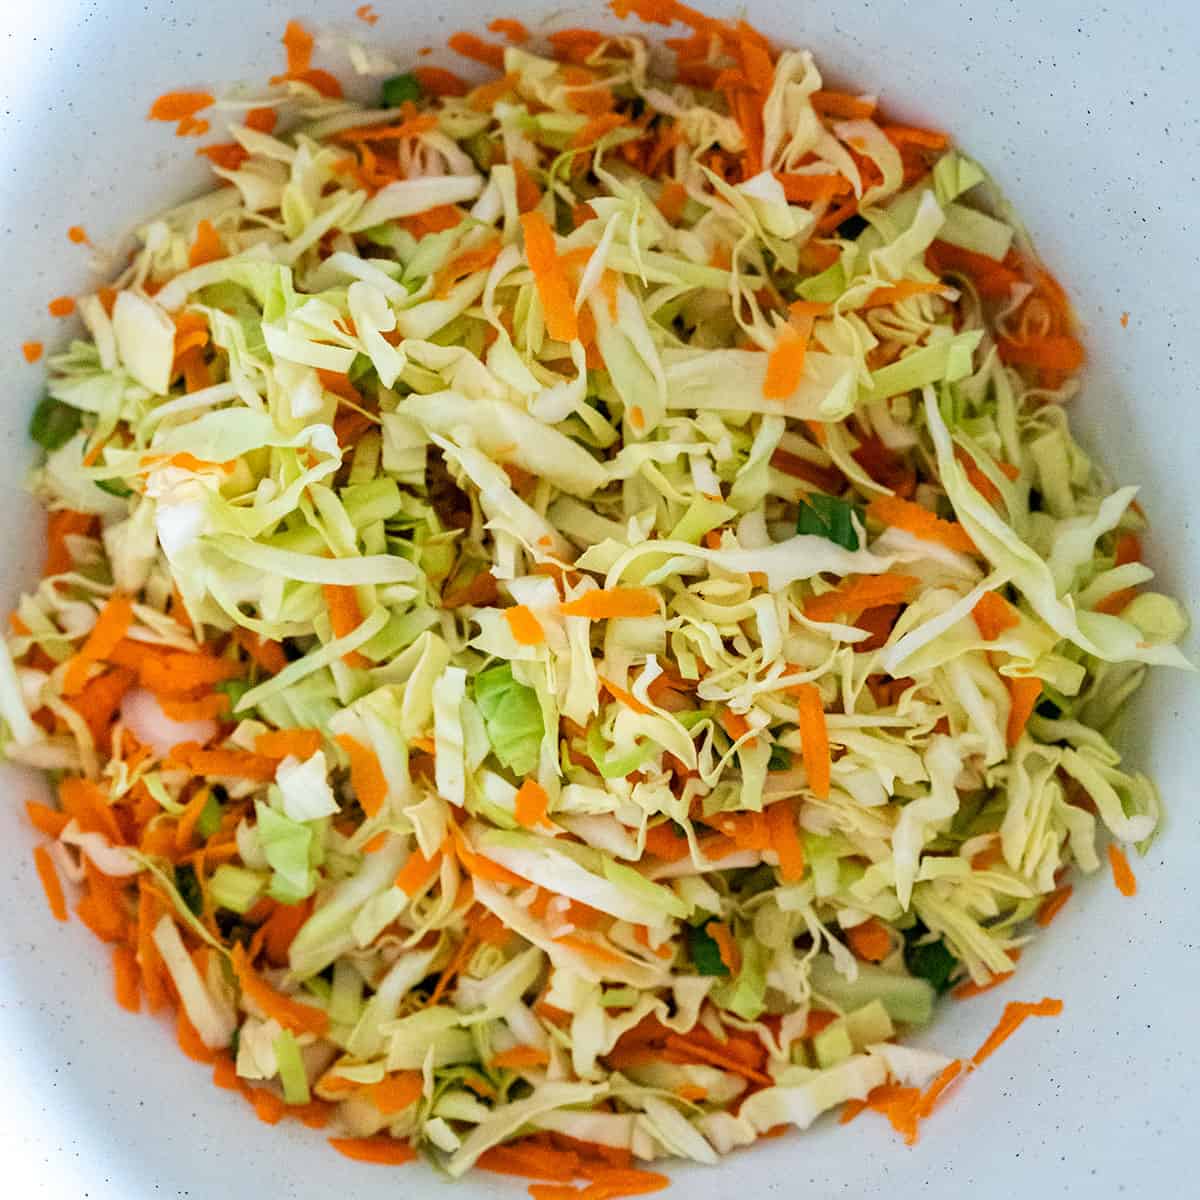 Bowl of shredded cabbage, carrots and green onions.